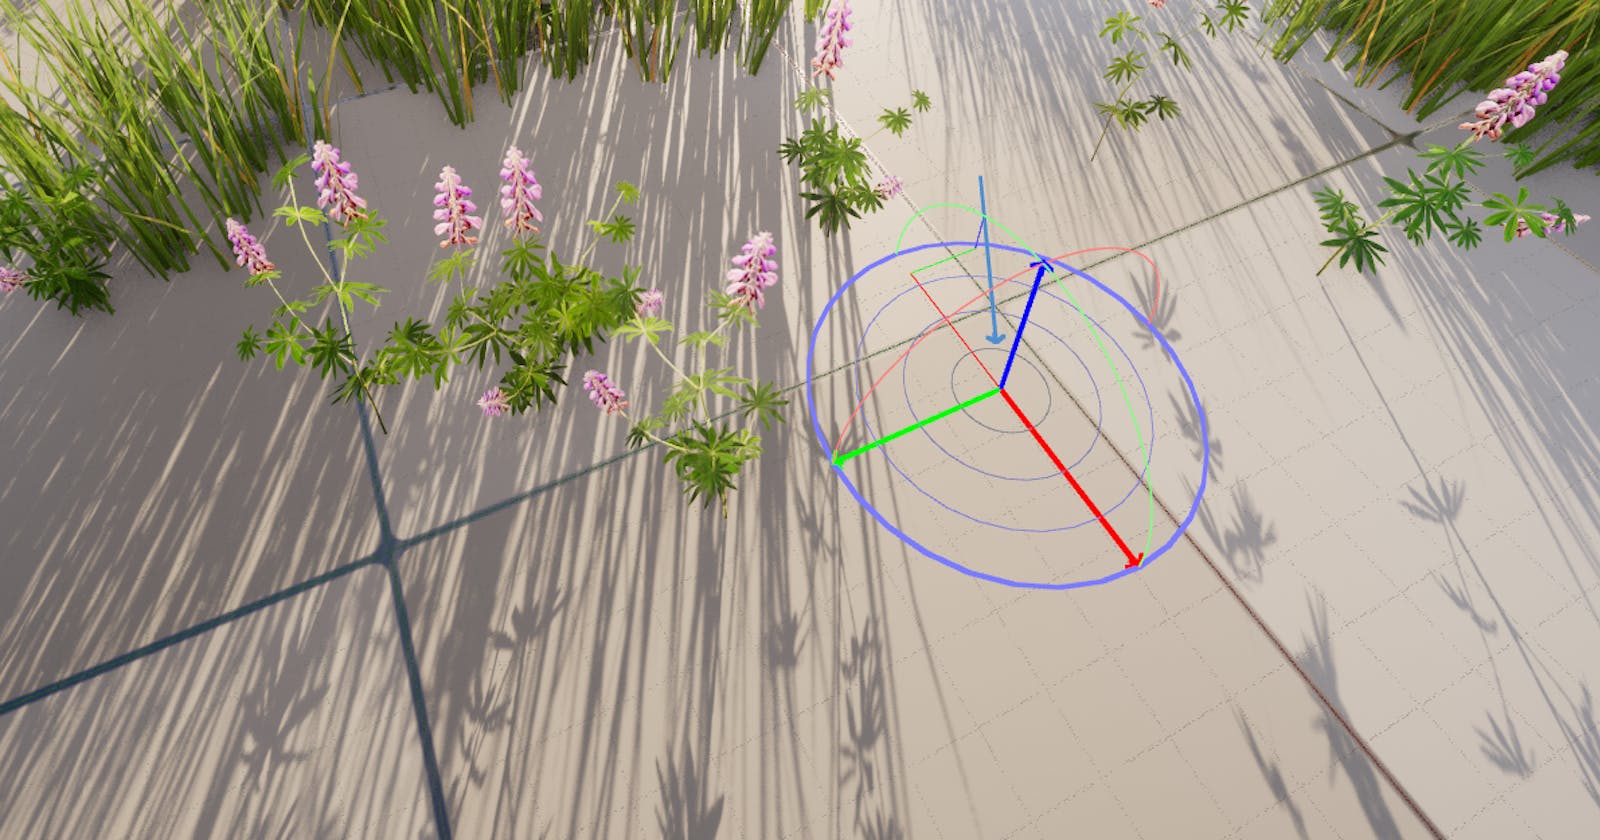 How to adjust the sun's position in Unreal Engine